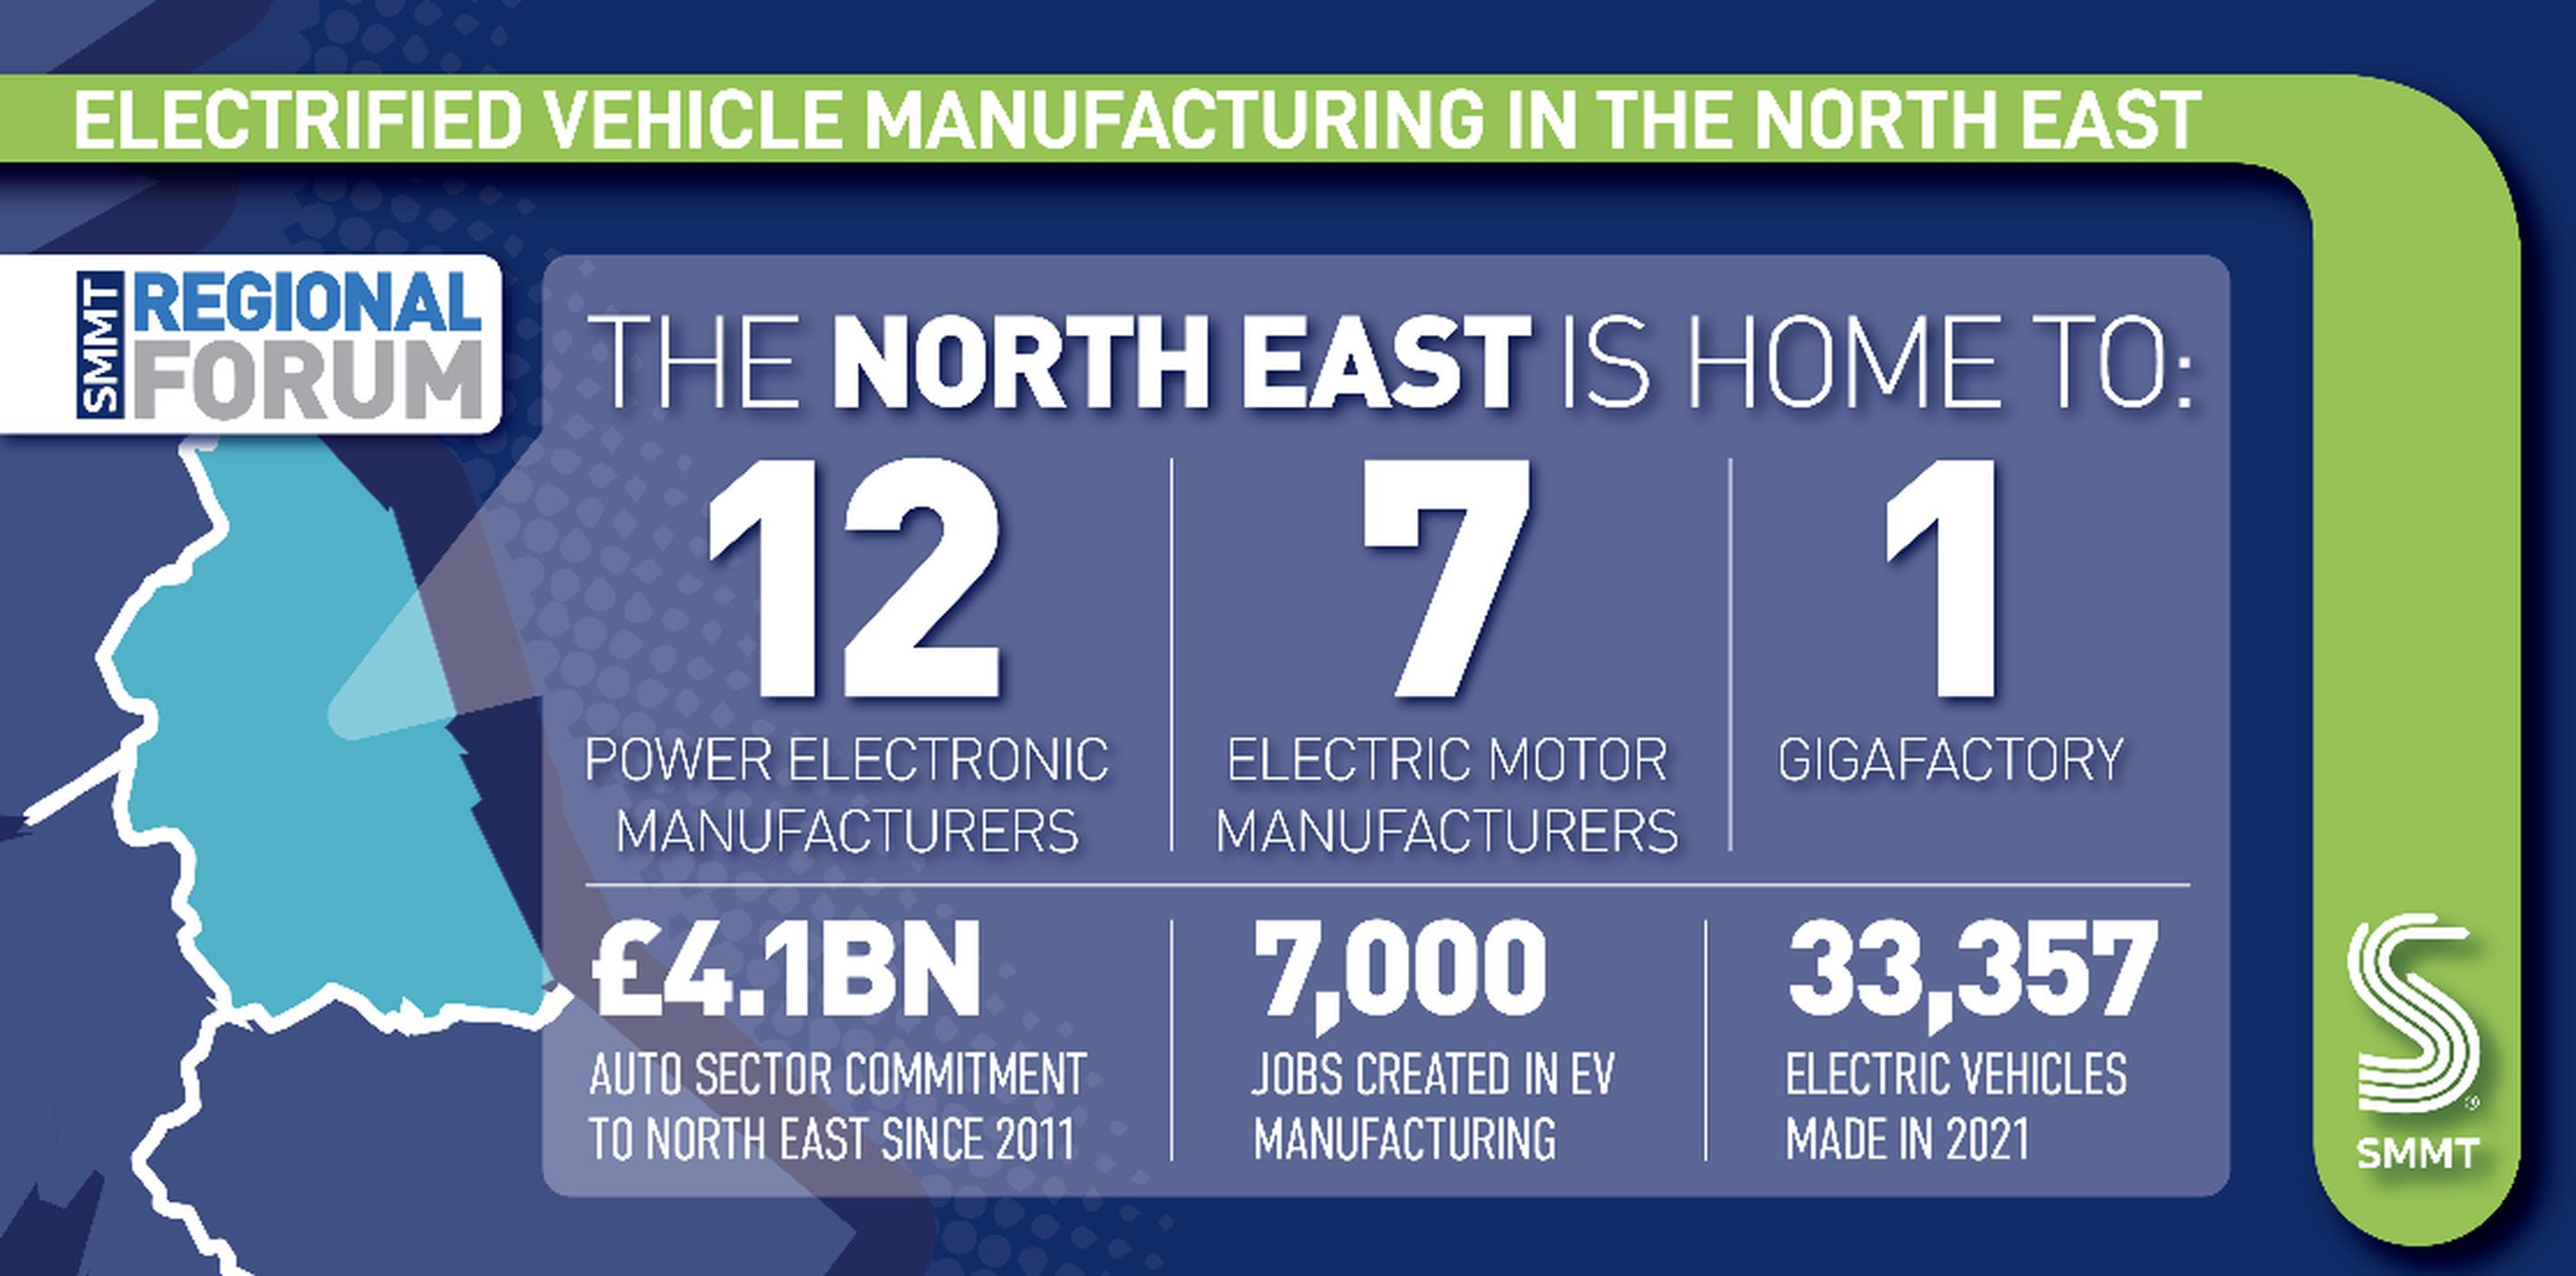 Automotive leaders will gather to drive electrified vehicle manufacturing in North East